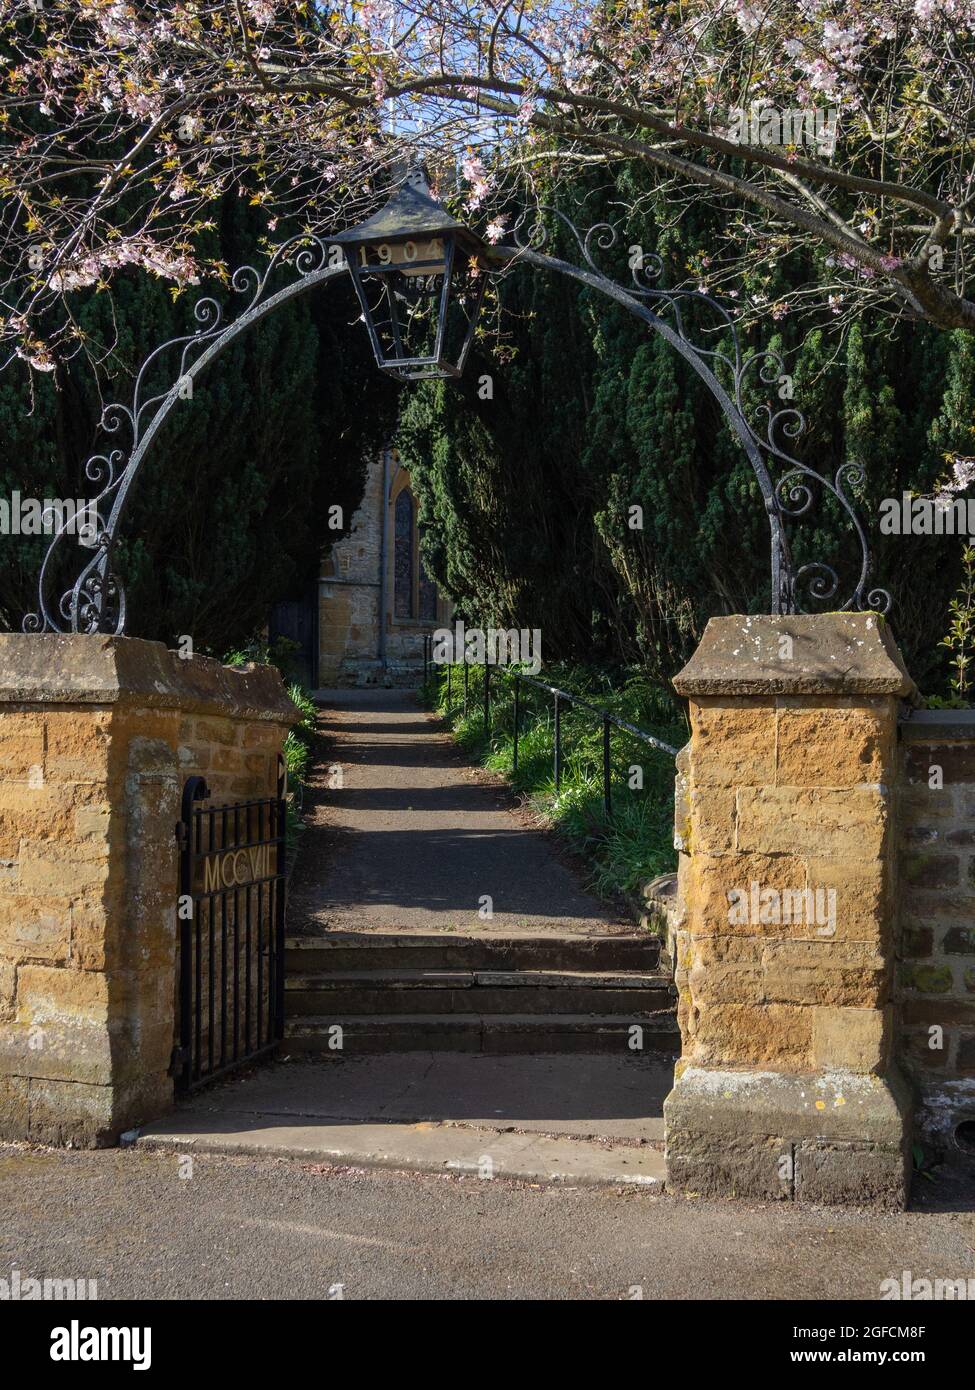 Stone gateposts and a metal arch at the entrance to the church of St Mary in the village of Dallington, Northampton, UK Stock Photo